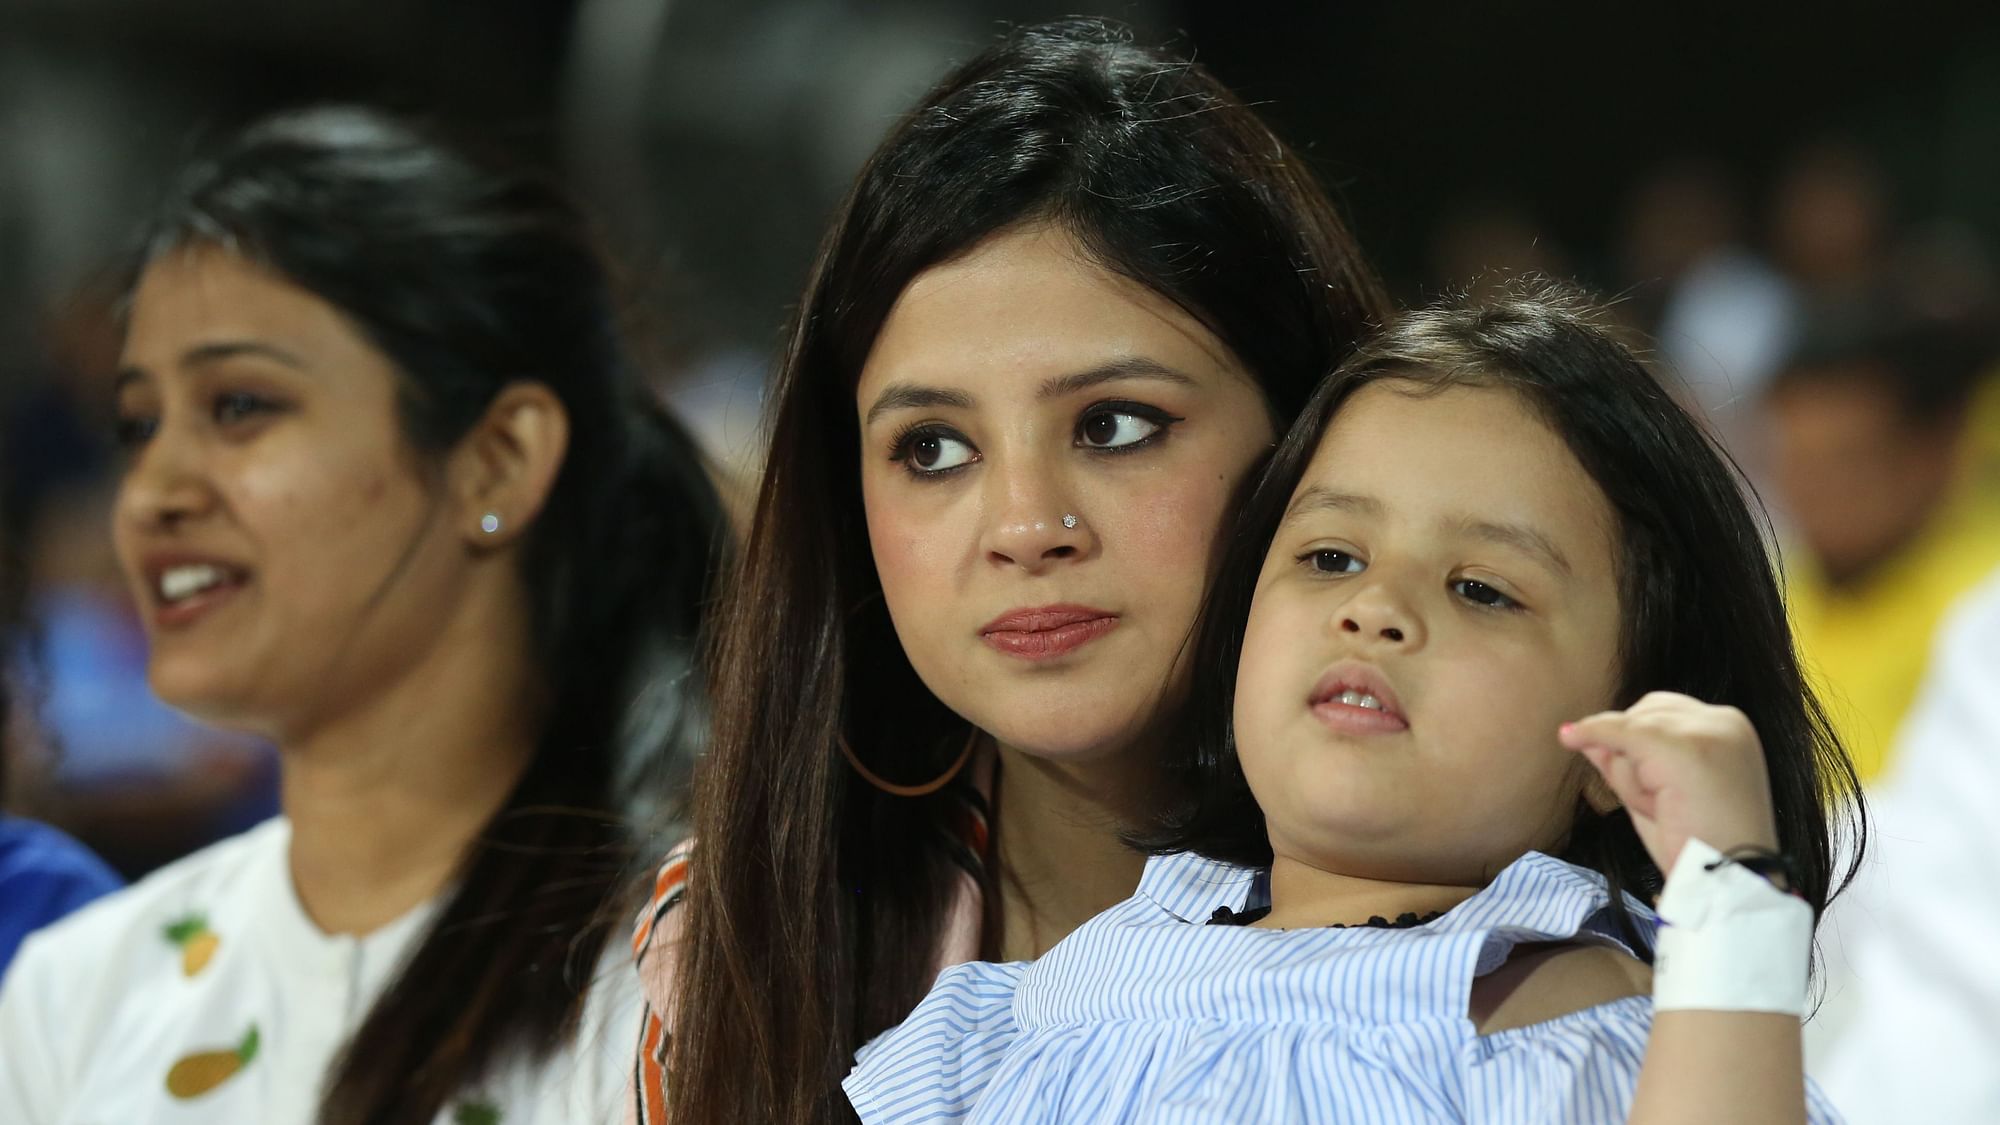 MS Dhoni’s wife Sakshi and daughter Ziva during CSK’s IPL 2019 match against Delhi Capitals.